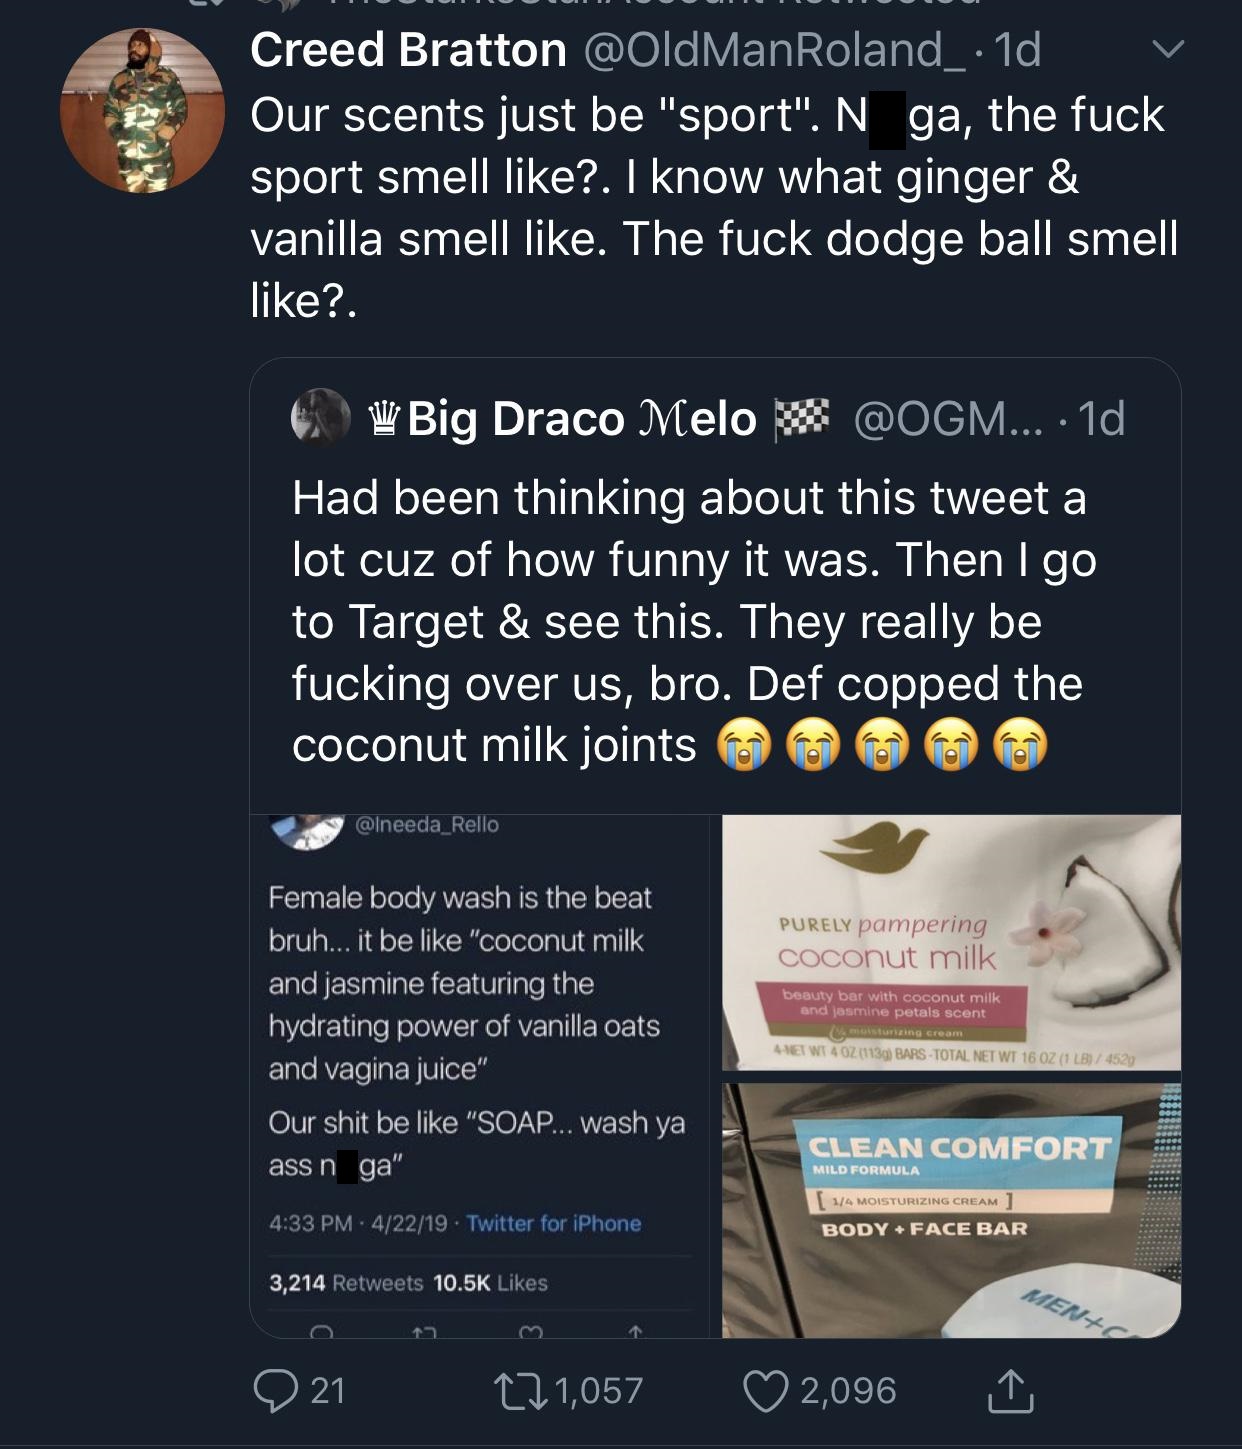 screenshot - Creed Bratton 1d V Our scents just be "sport". N ga, the fuck sport smell ?. I know what ginger & vanilla smell . The fuck dodge ball smell ?. W Big Draco Melo ... 1d Had been thinking about this tweet a lot cuz of how funny it was. Then I go